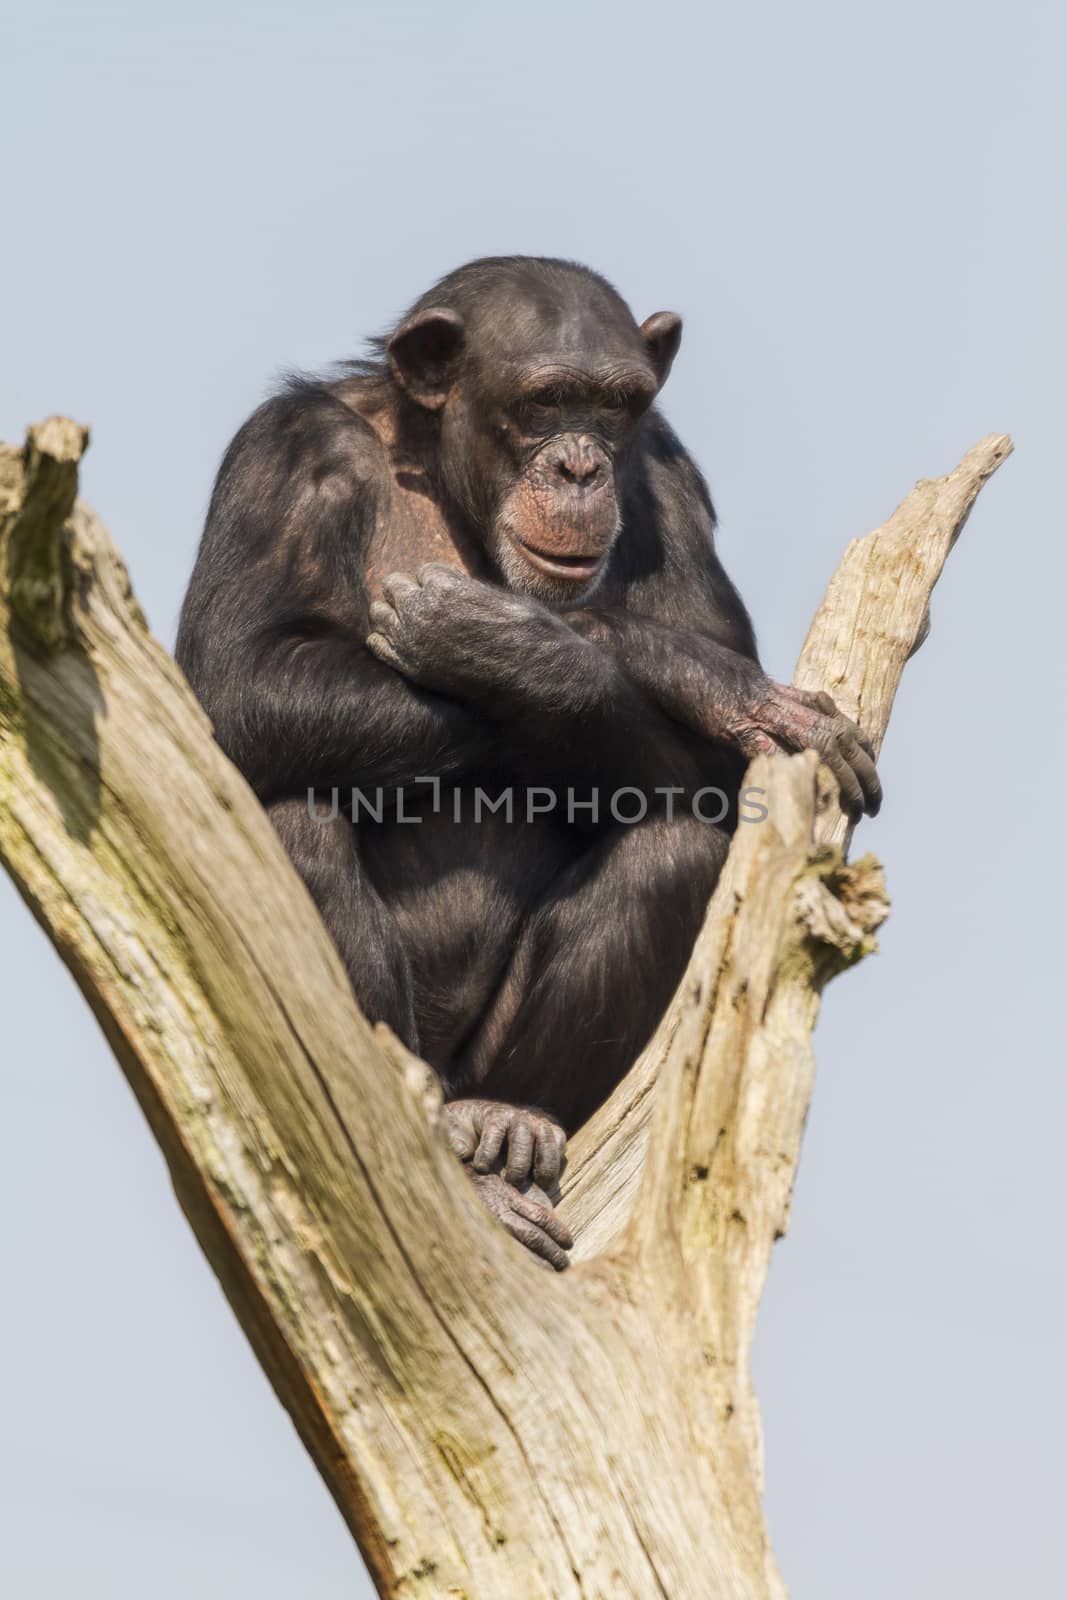 Chimpanzee sitting in a tree  with blue sky background